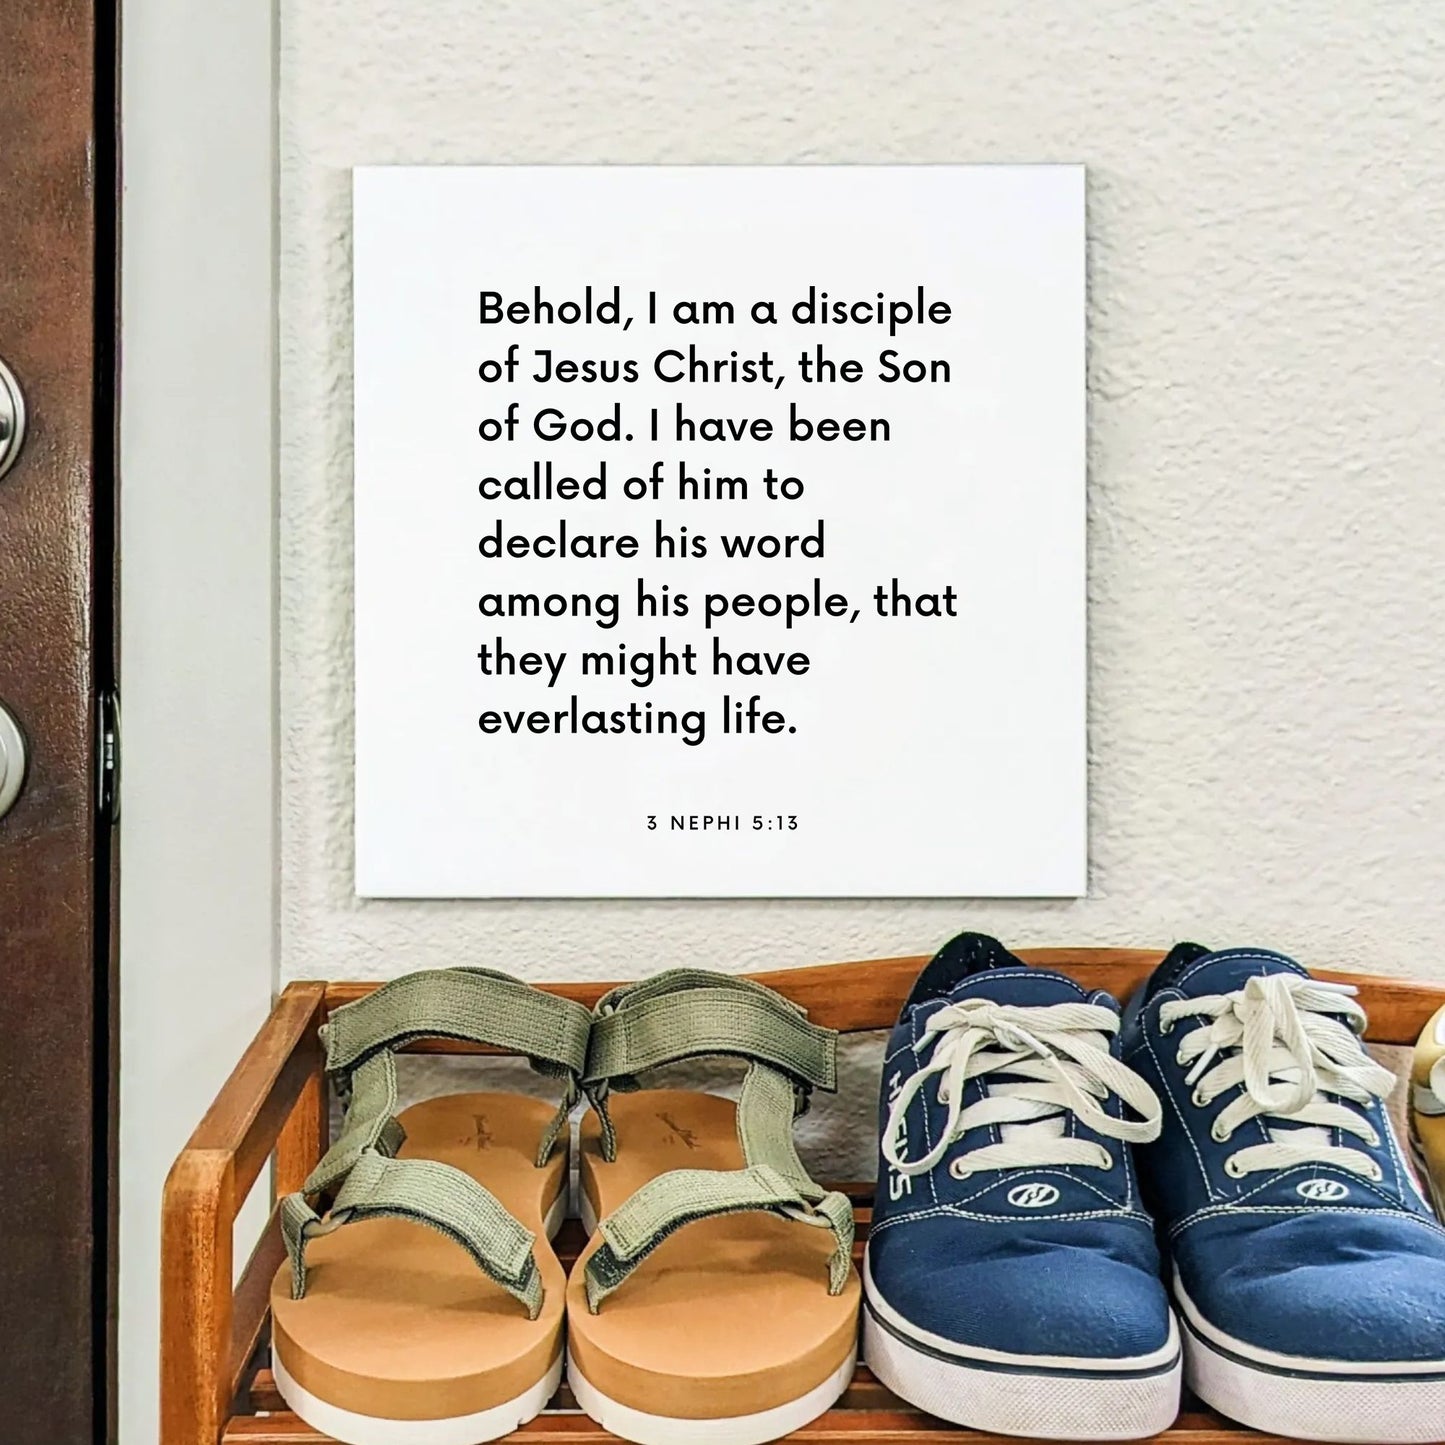 Shoes mouting of the scripture tile for 3 Nephi 5:13 - "Behold, I am a disciple of Jesus Christ, the Son of God"